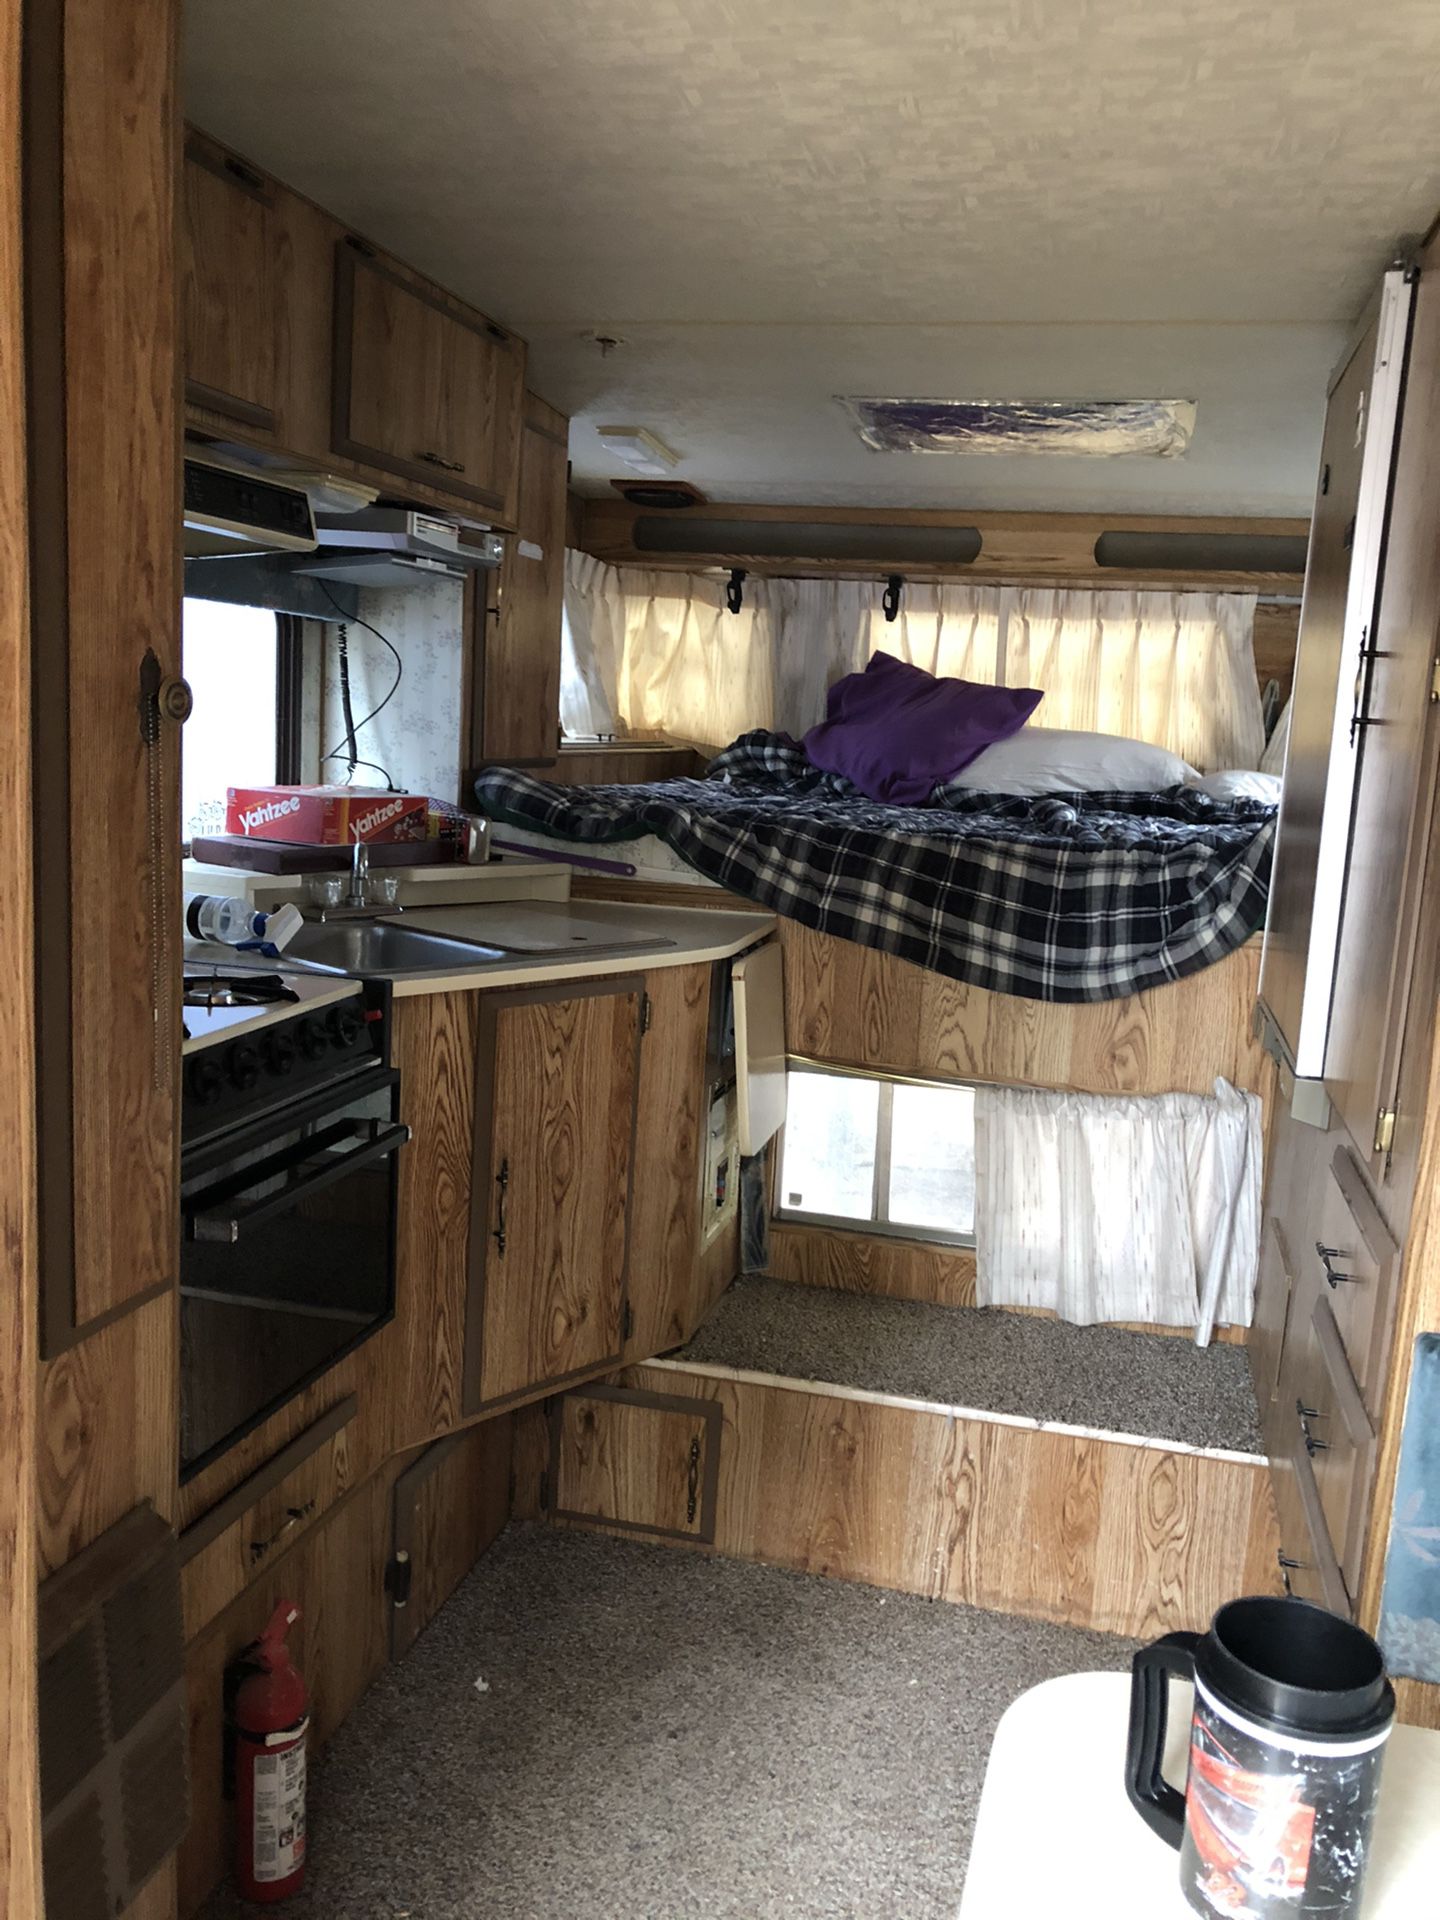 Photo 1989 SS long bed camper